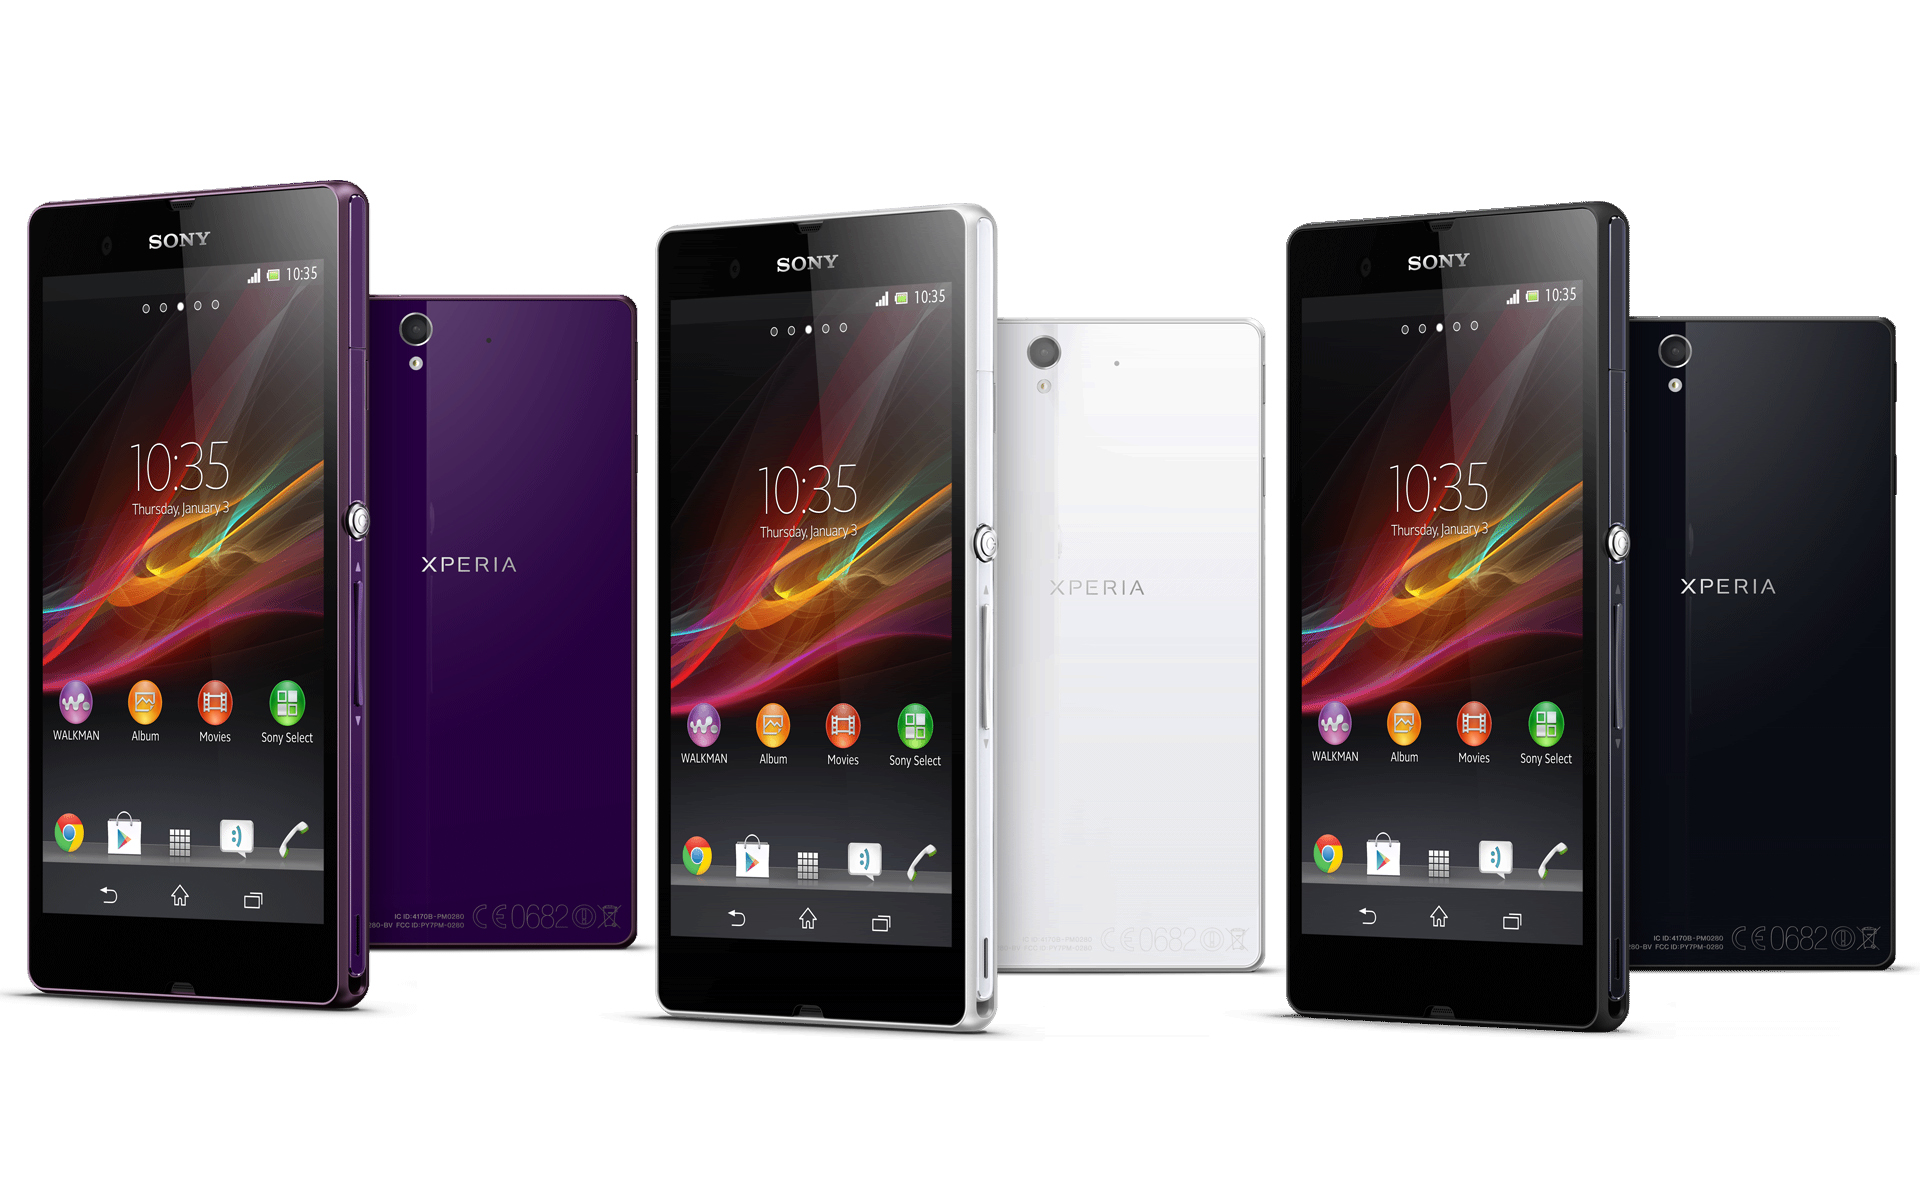 Sony Xperia Z Series Wallpaper HD Res